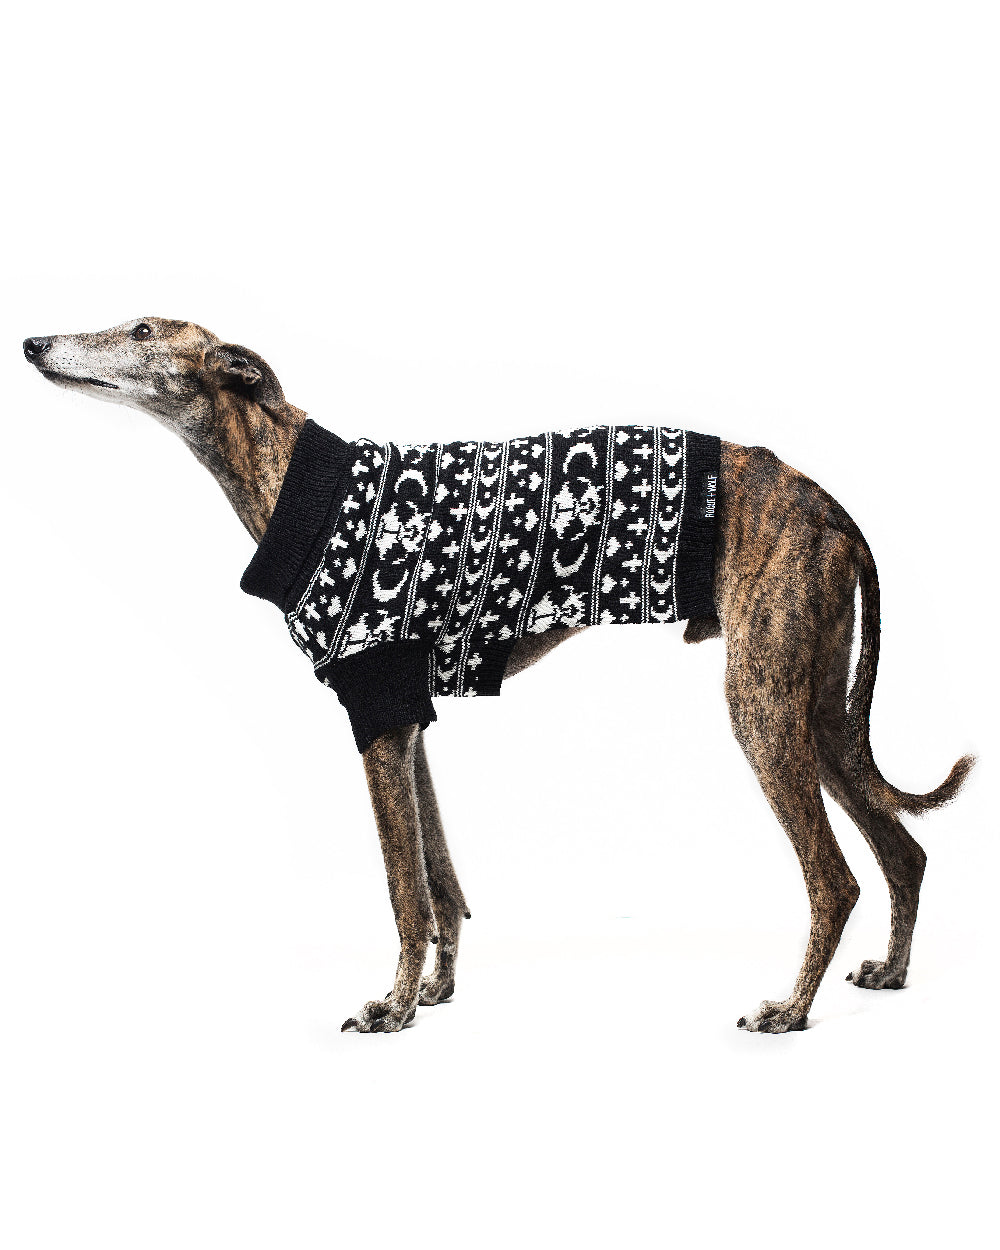 Sworn Enemy Knitted Pet Sweater - Dog or Cat